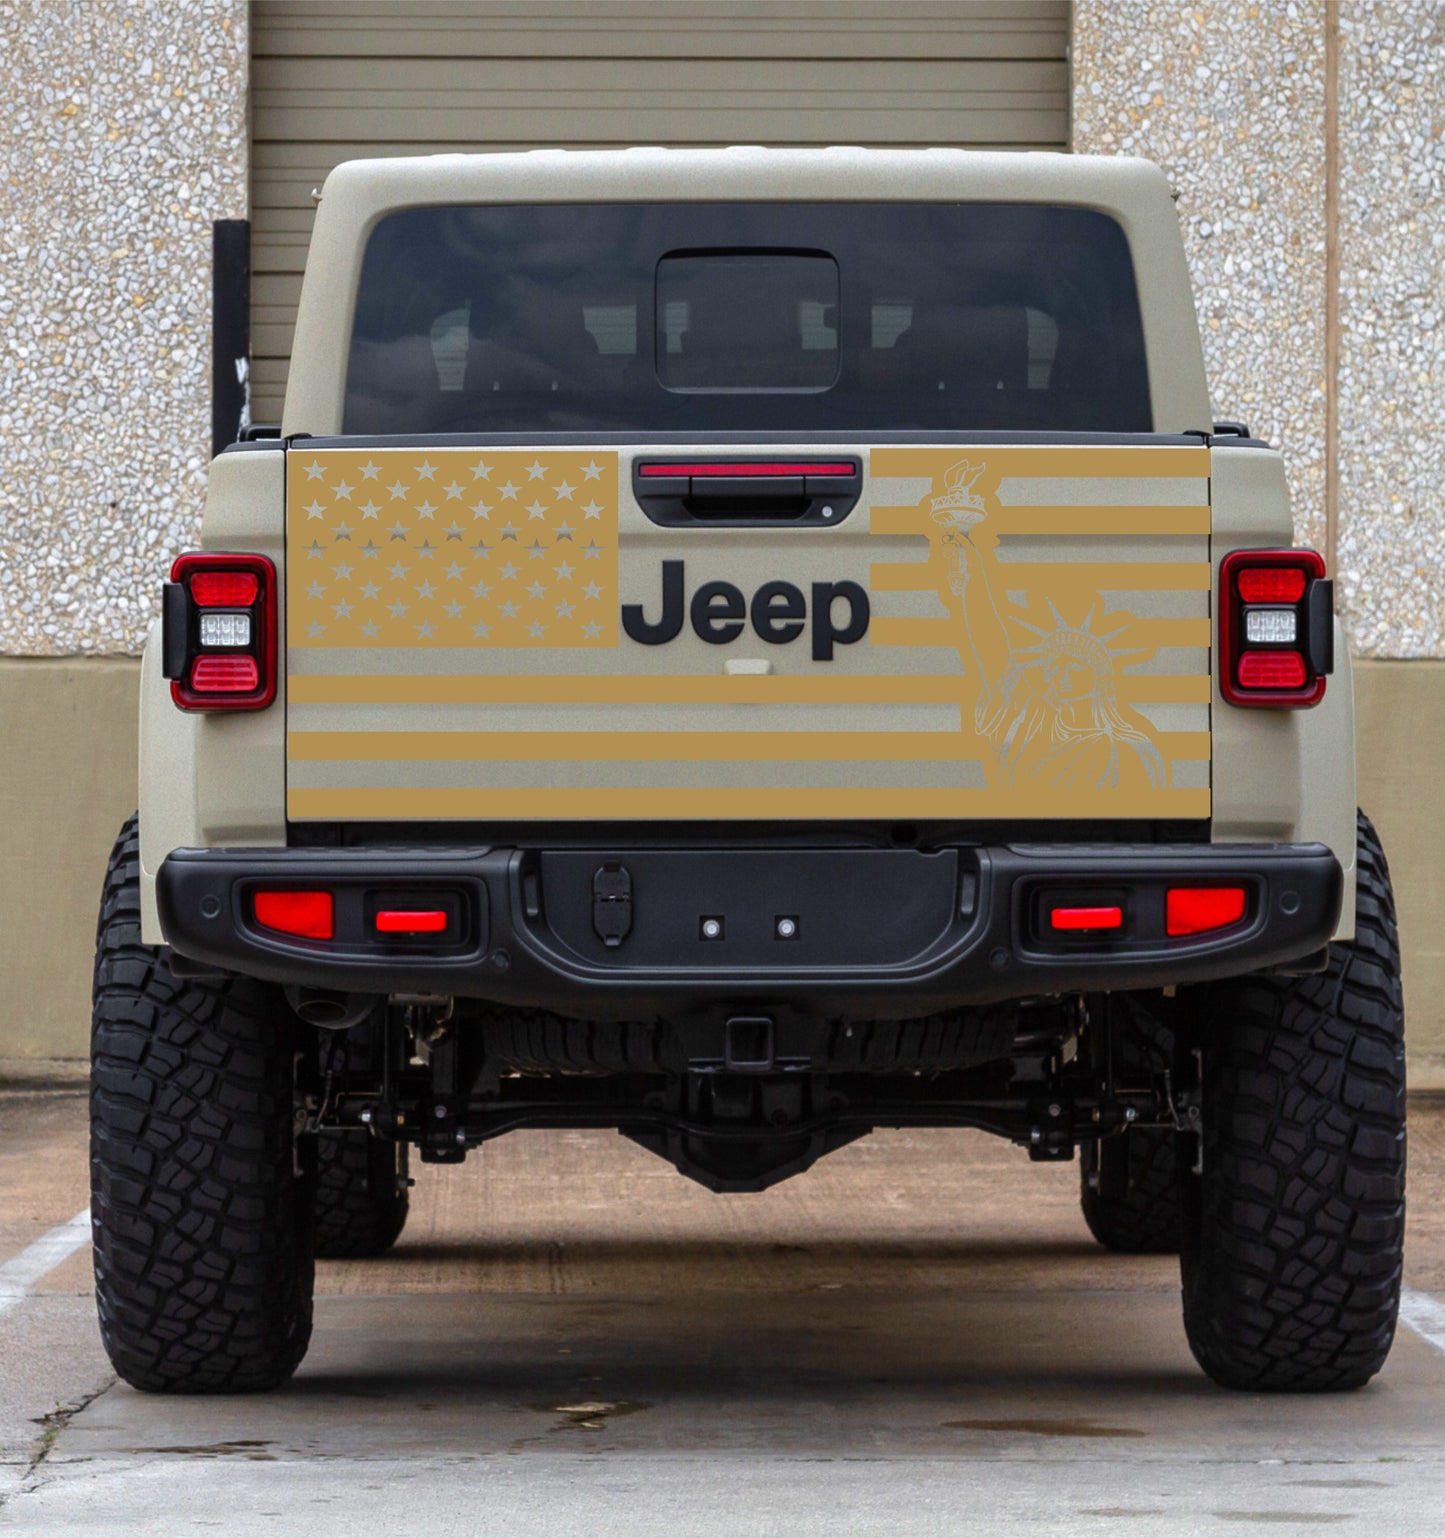 Jeep Gladiator Decal Gladiator Tailgate Decal American Flag Statue of Liberty Decal Stickers